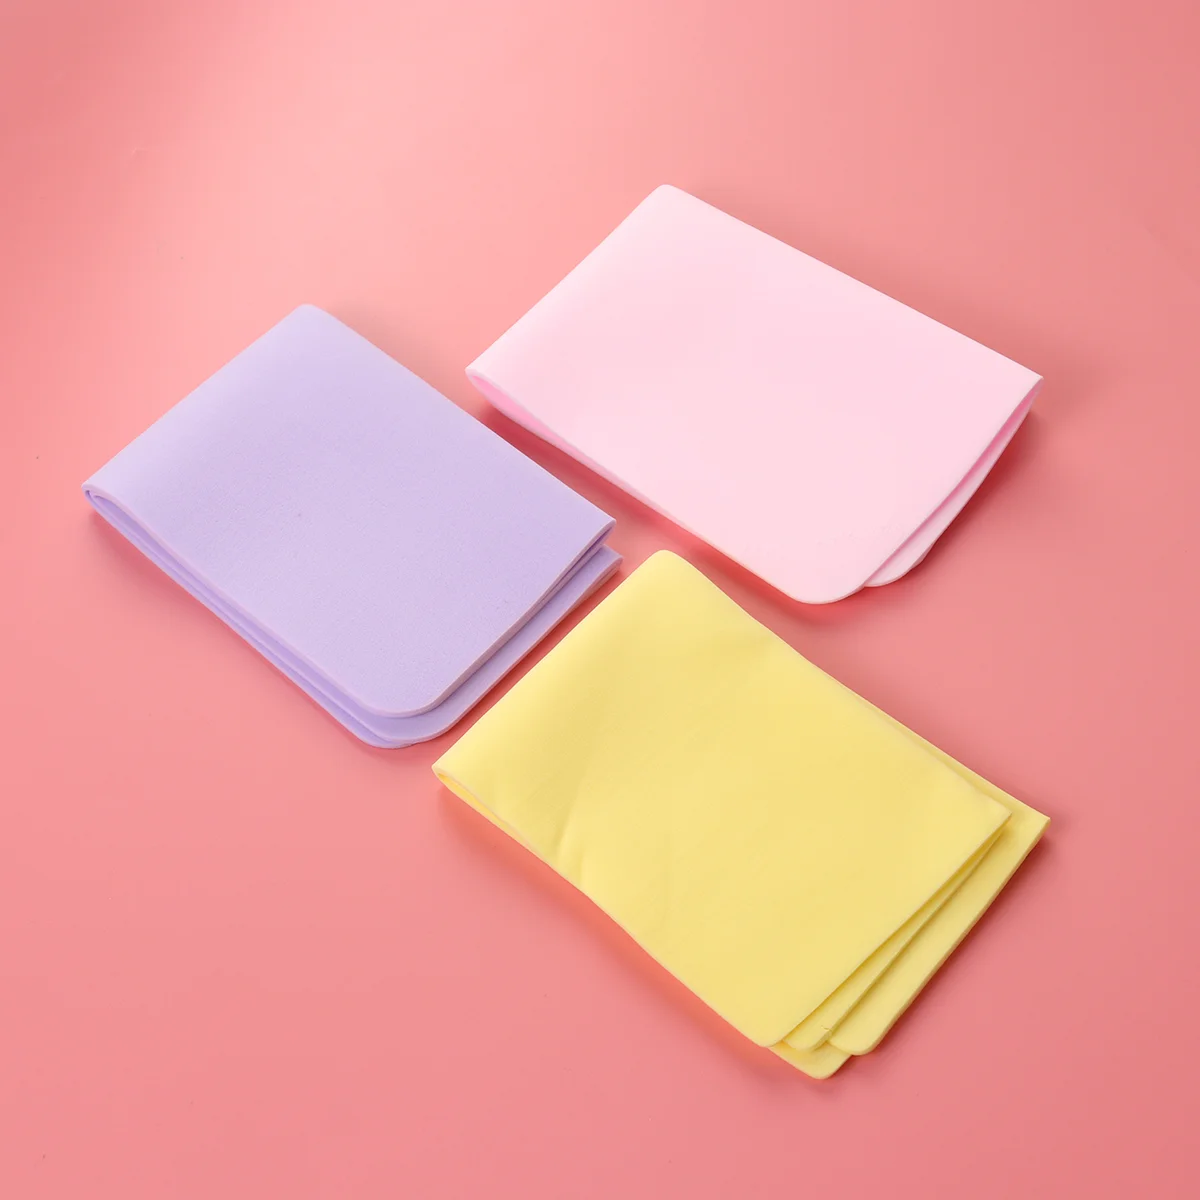 

3 Pcs Cleansing Sponge Skin Care Make Remover Wipes Absorb Water Facial Cleaning Beauty Sponges